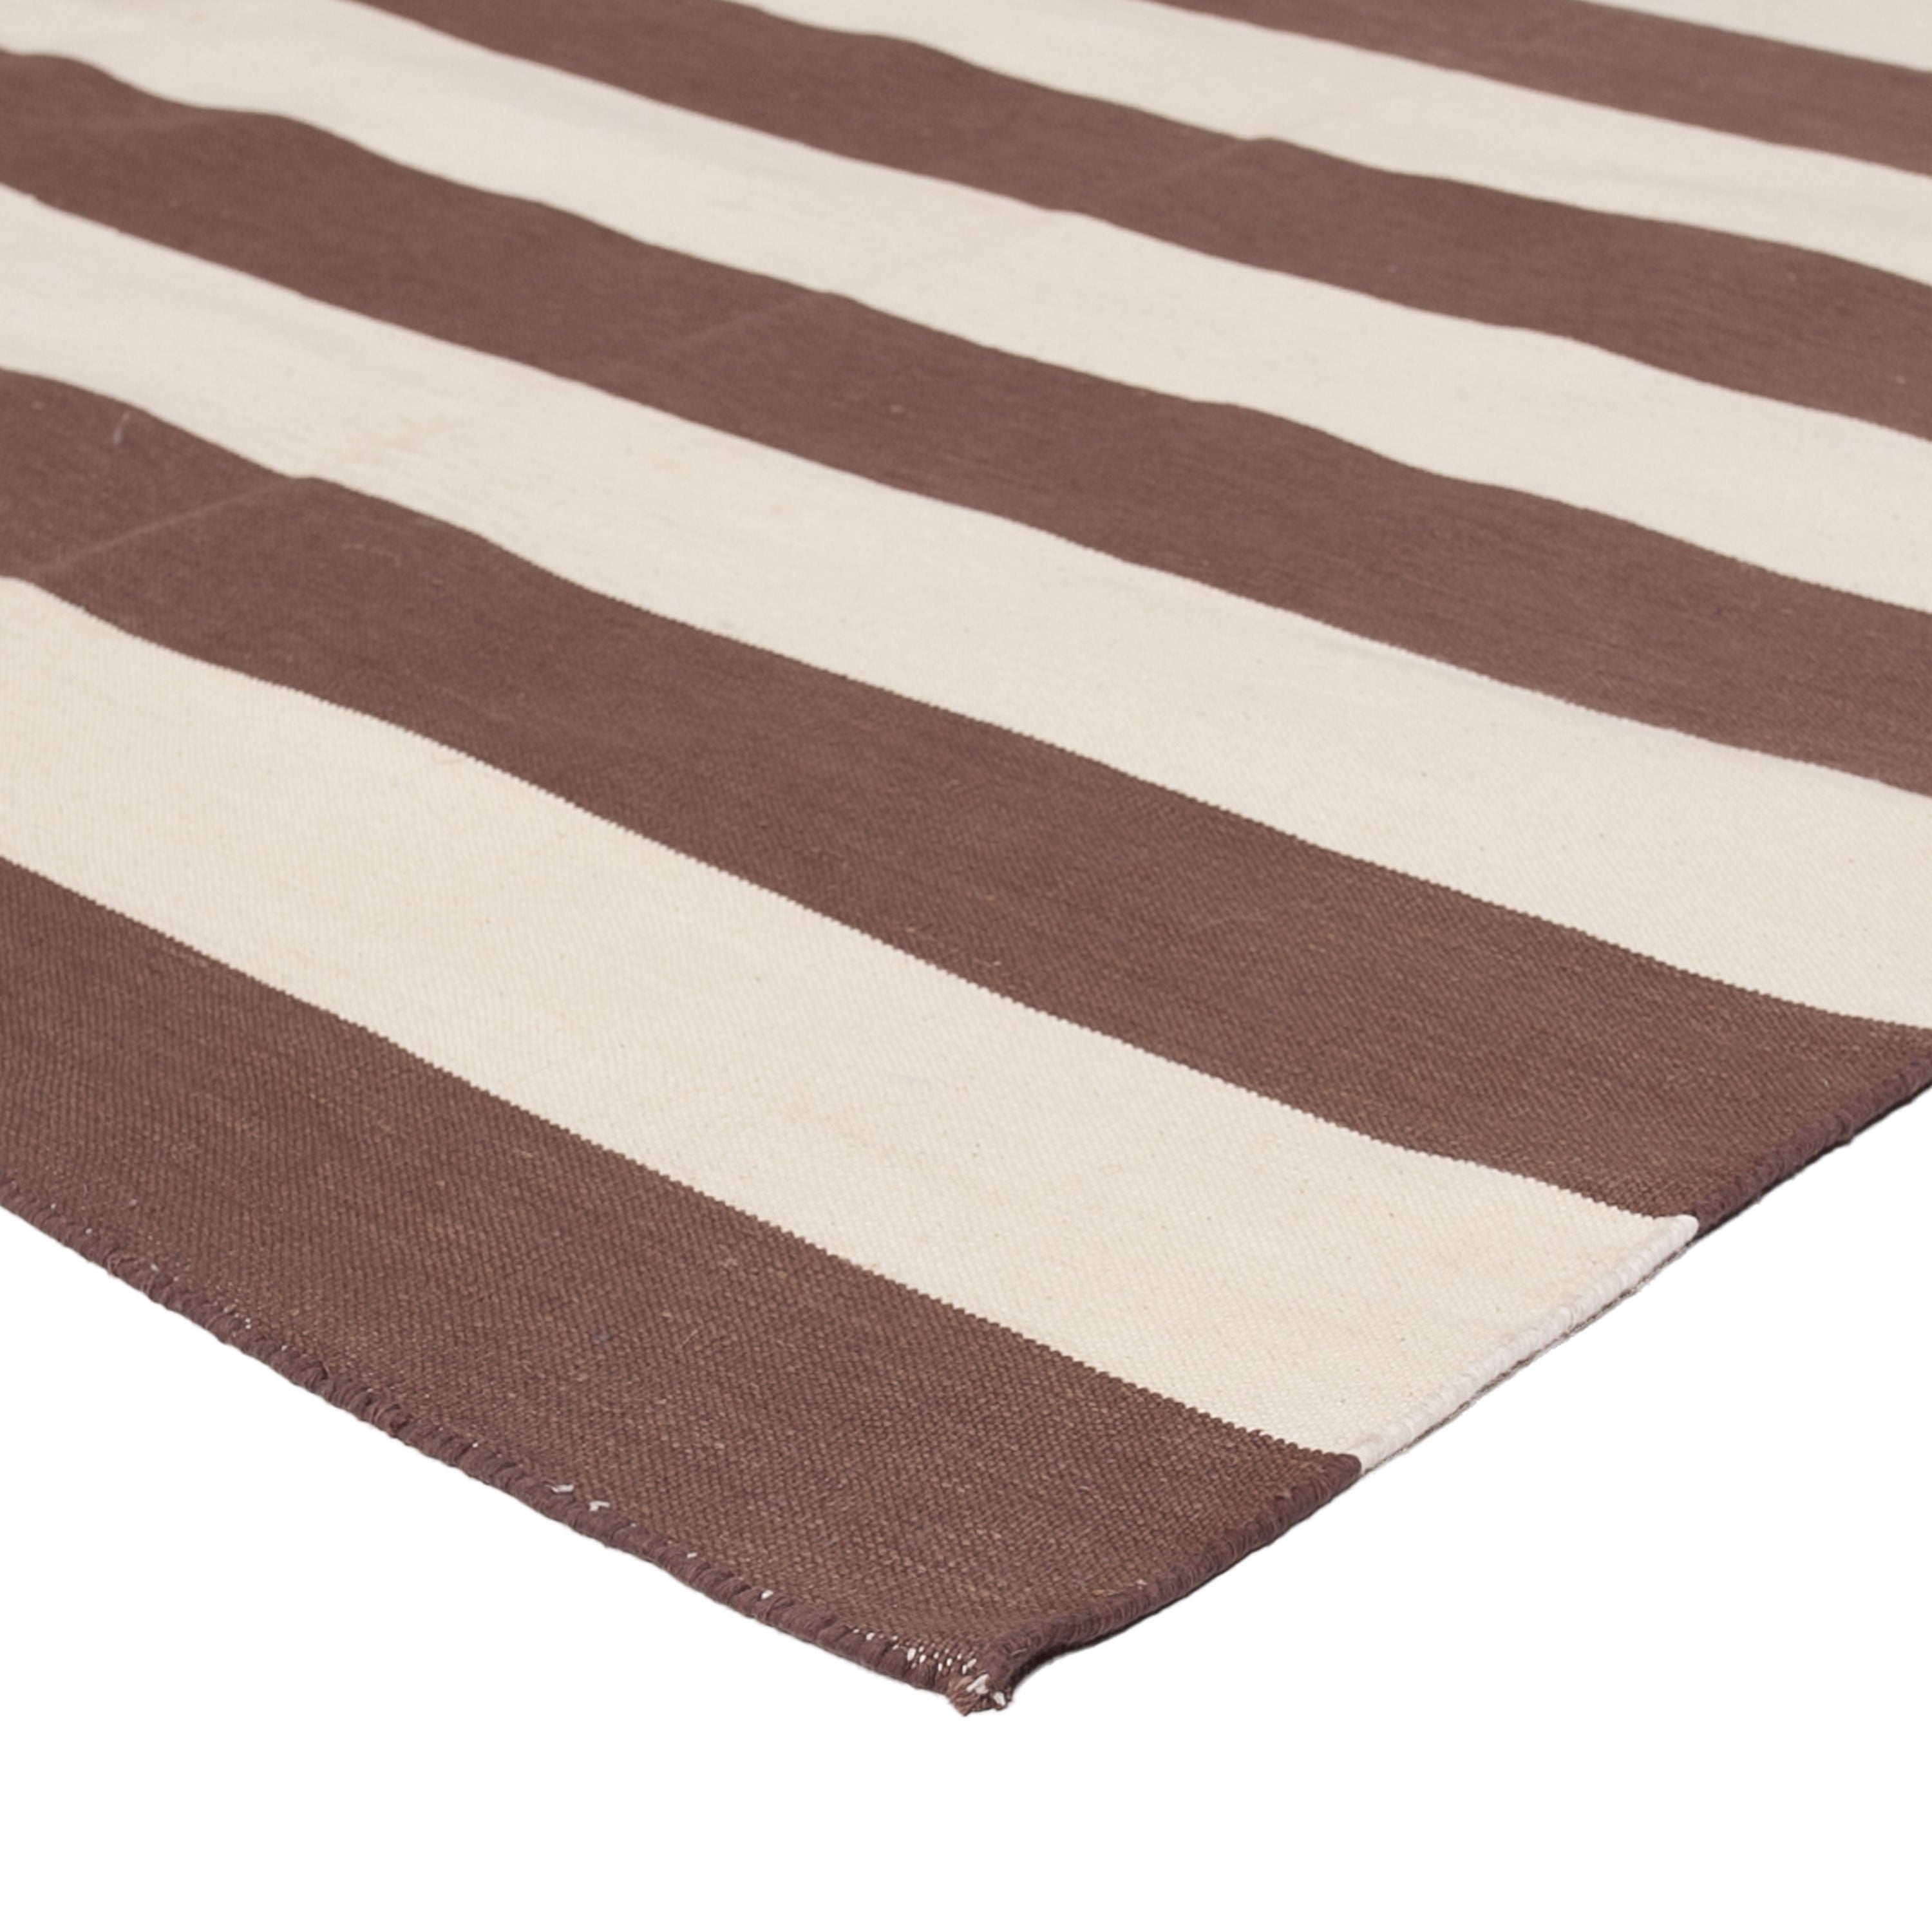 Brown and White Striped Flatweave Cotton Rug - 3'6" x 5'6"